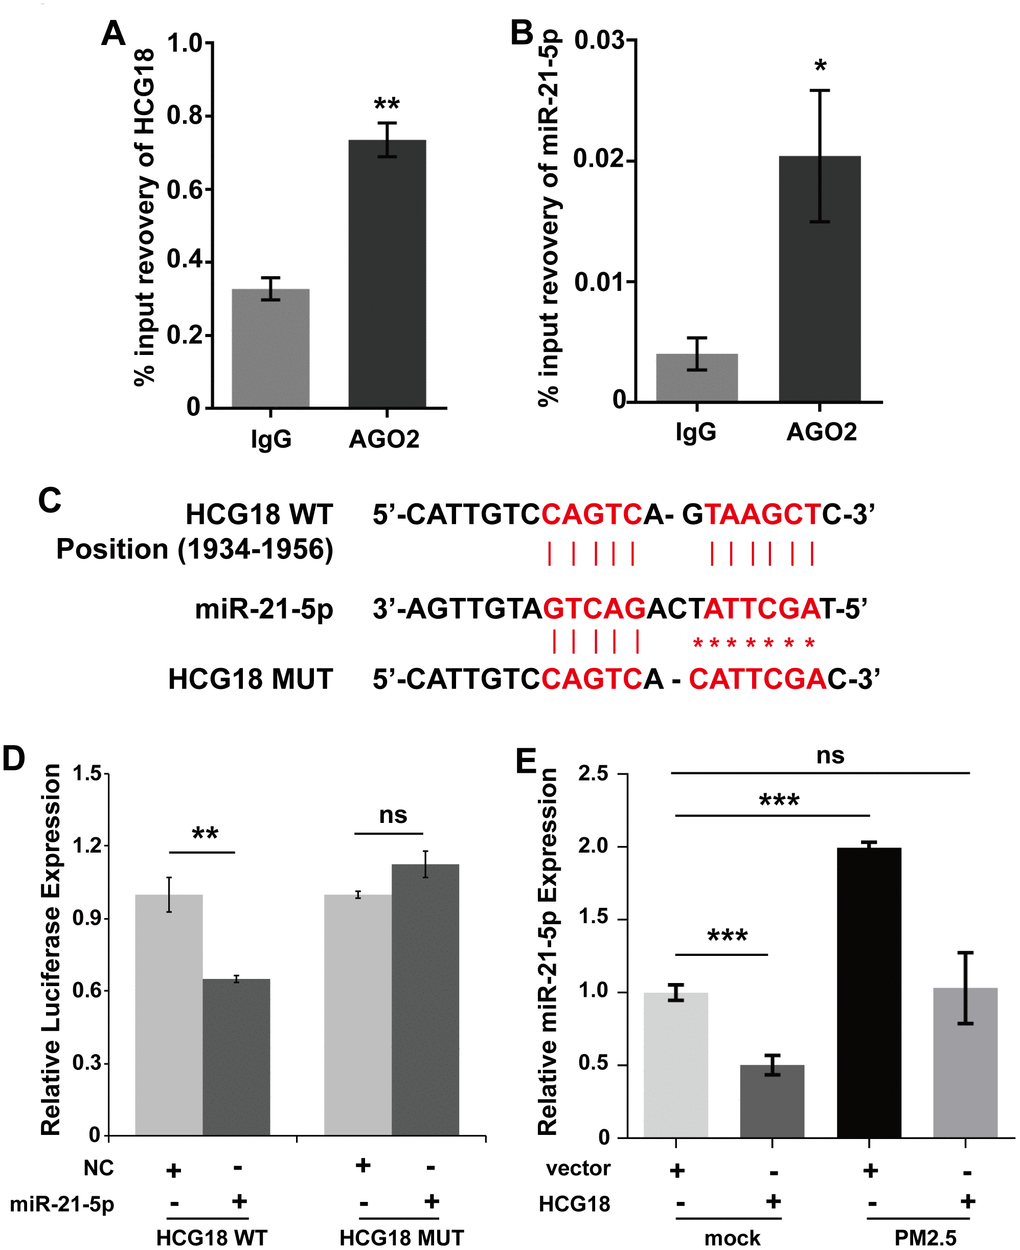 LncRNA HCG18 acts as a ceRNA for miR-21-5p. (A) HCG18 was enriched in AGO2 RIP samples. (B). MiR-21-5p was enriched in AGO2 RIP samples. (C) The binding relationship between HCG18 and miR-21-5p was predicted by DIANA. (D) The binding relationship between HCG18 and miR-21-5p was determined by Dual-luciferase reporter assay. (E) The interaction between HCG18 and miR-21-5p in PM2.5-treated HUVECs was analyzed by qRT-PCR. *: PPP